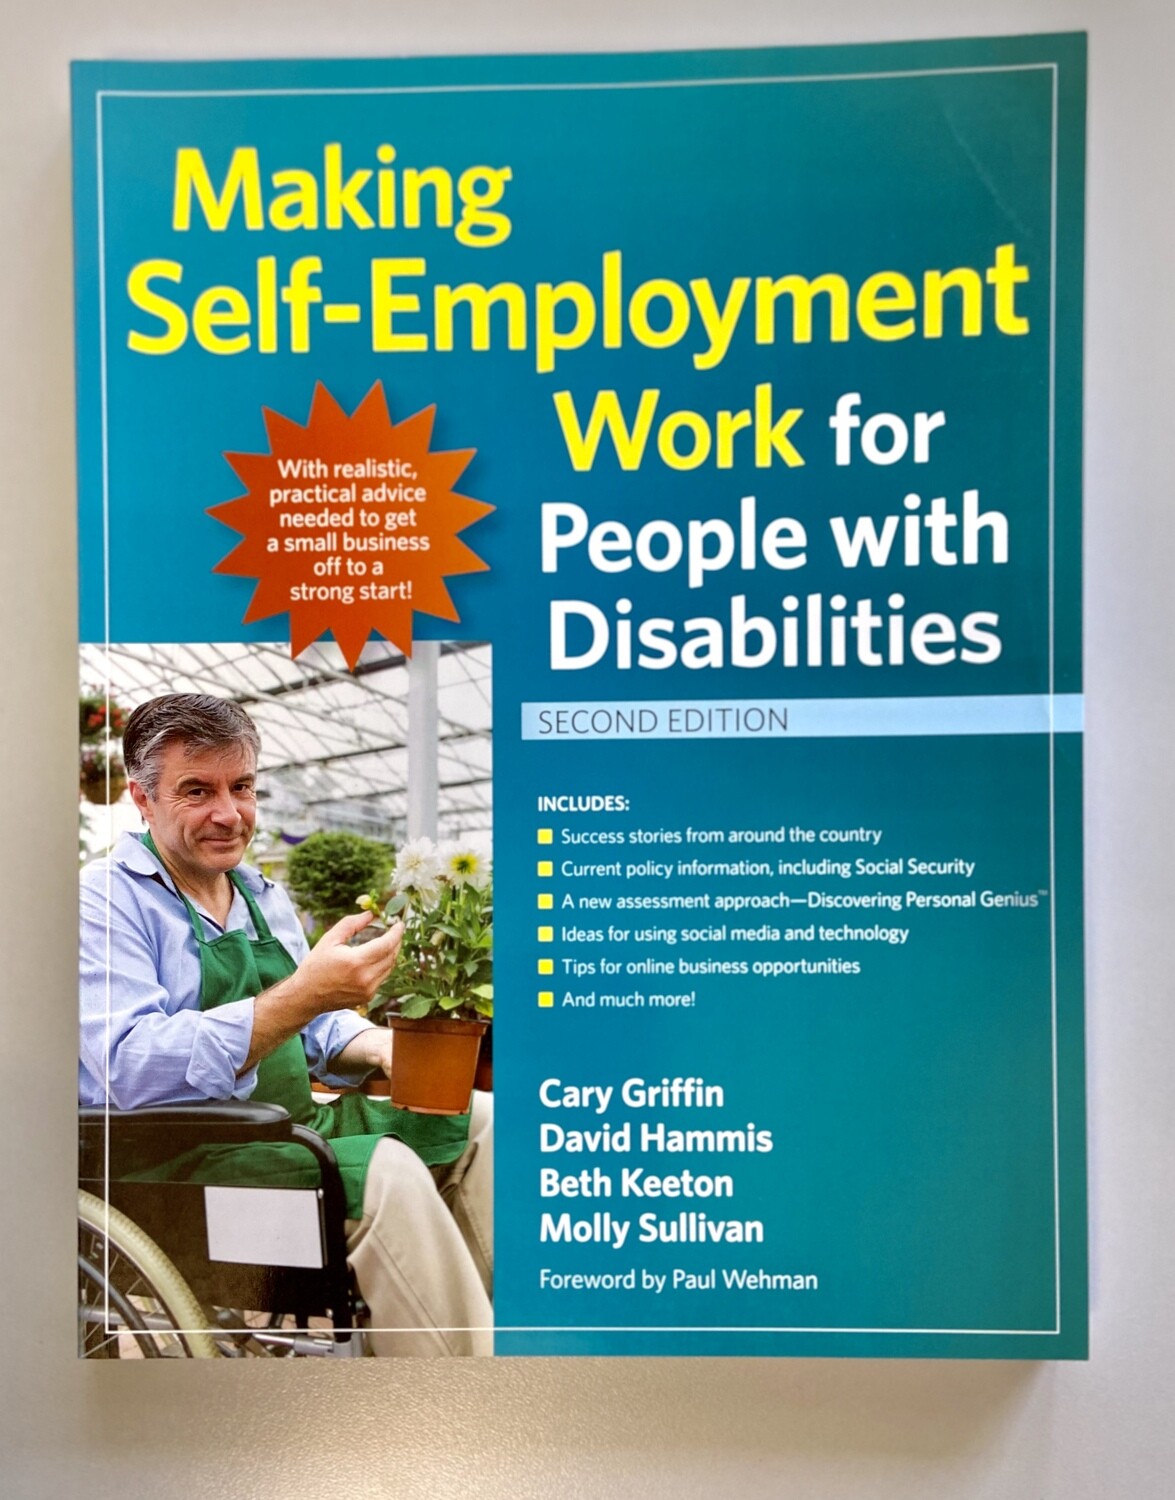 Making Self-Employment Work for People with Disabilities 2ed